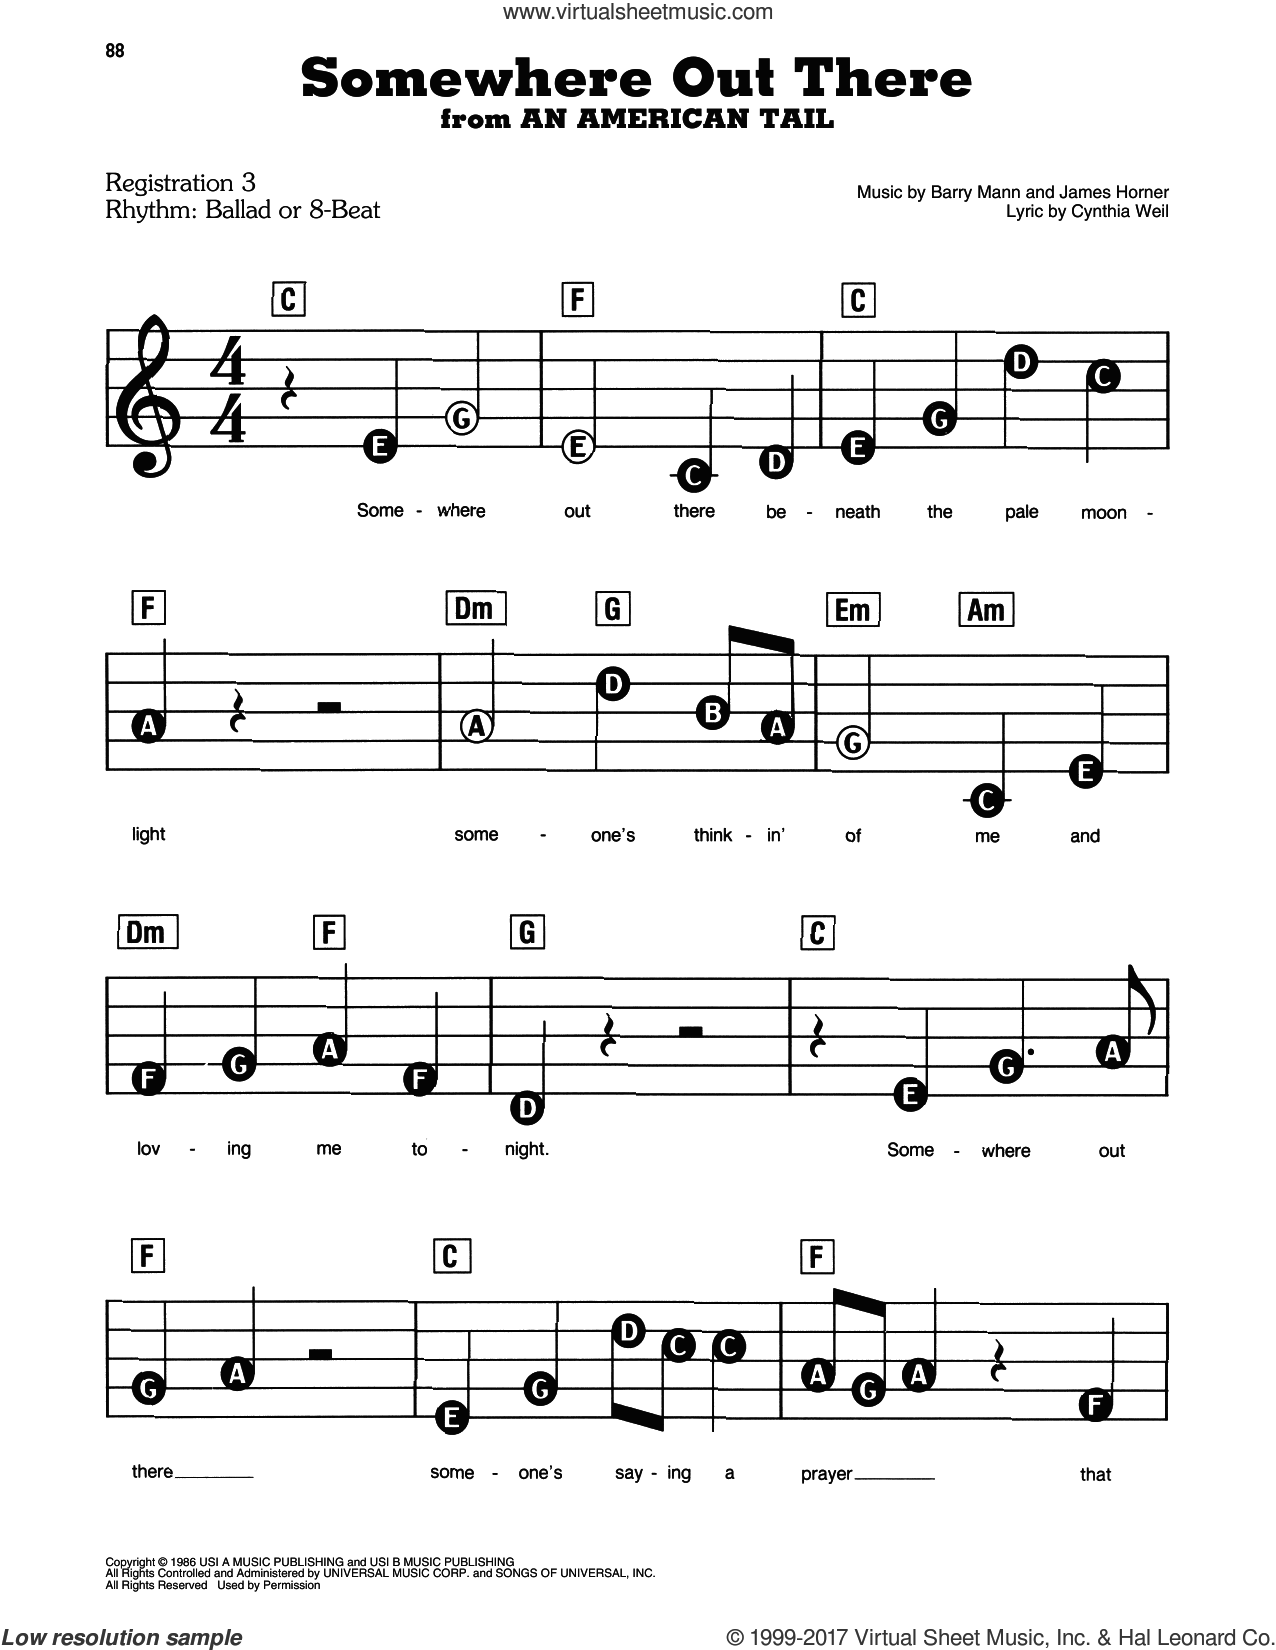 Somewhere Out There sheet music for piano or keyboard (E-Z Play)